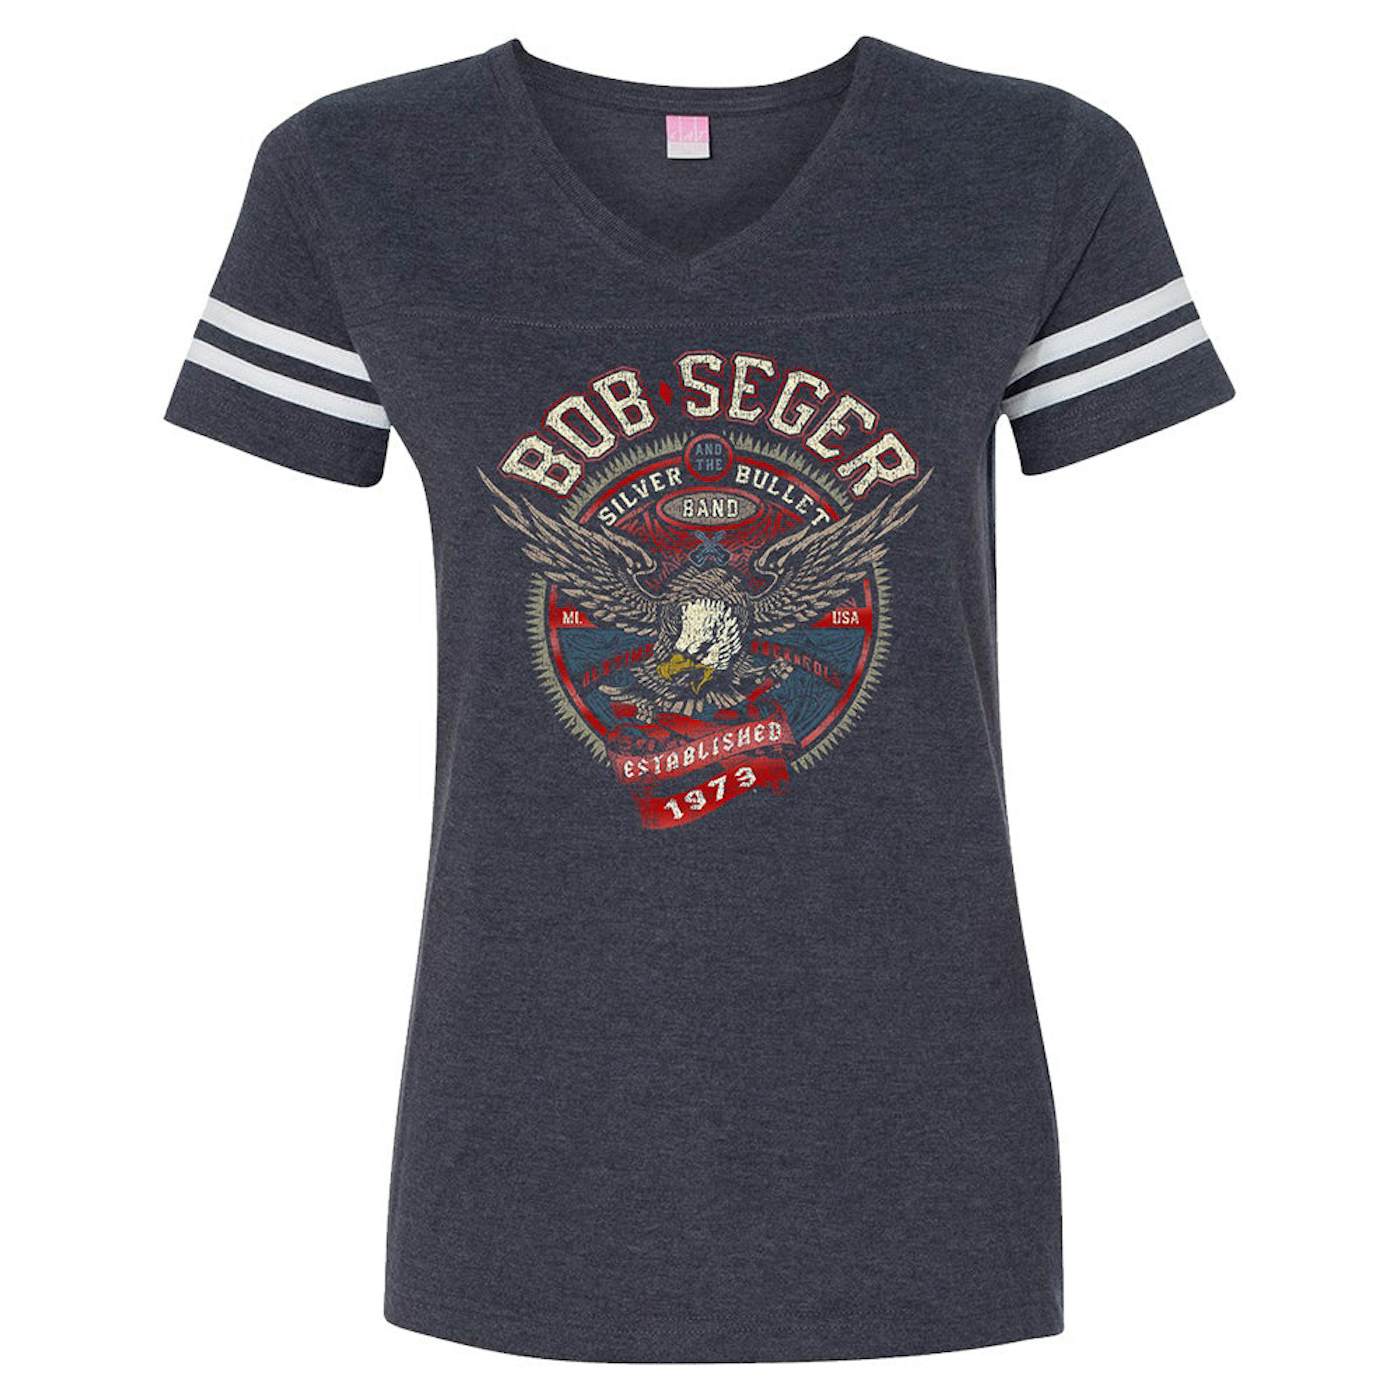 Bob Seger & The Silver Bullet Band Est 1973 Ladies Tee